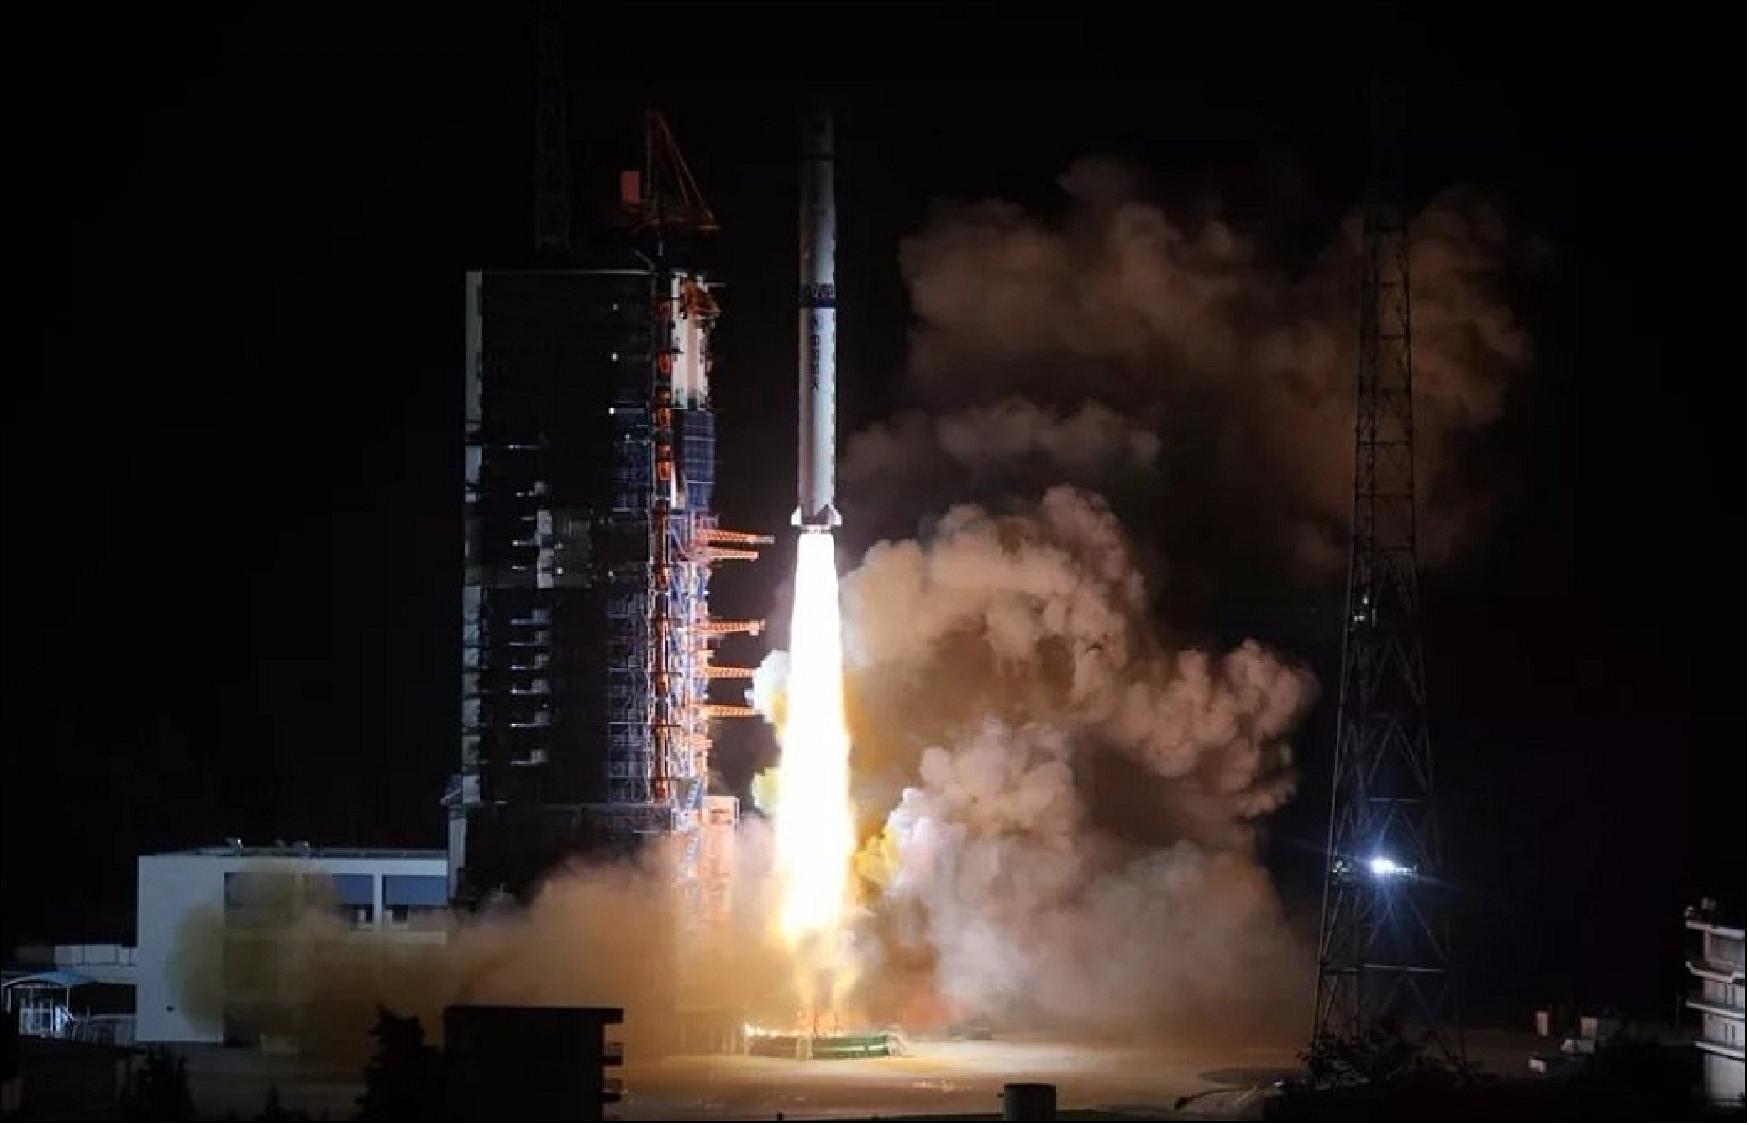 Figure 42: Photo of the Queqiao relay satellite, launched ahead of Chang’e-4 lunar mission (image credit: CNSA)